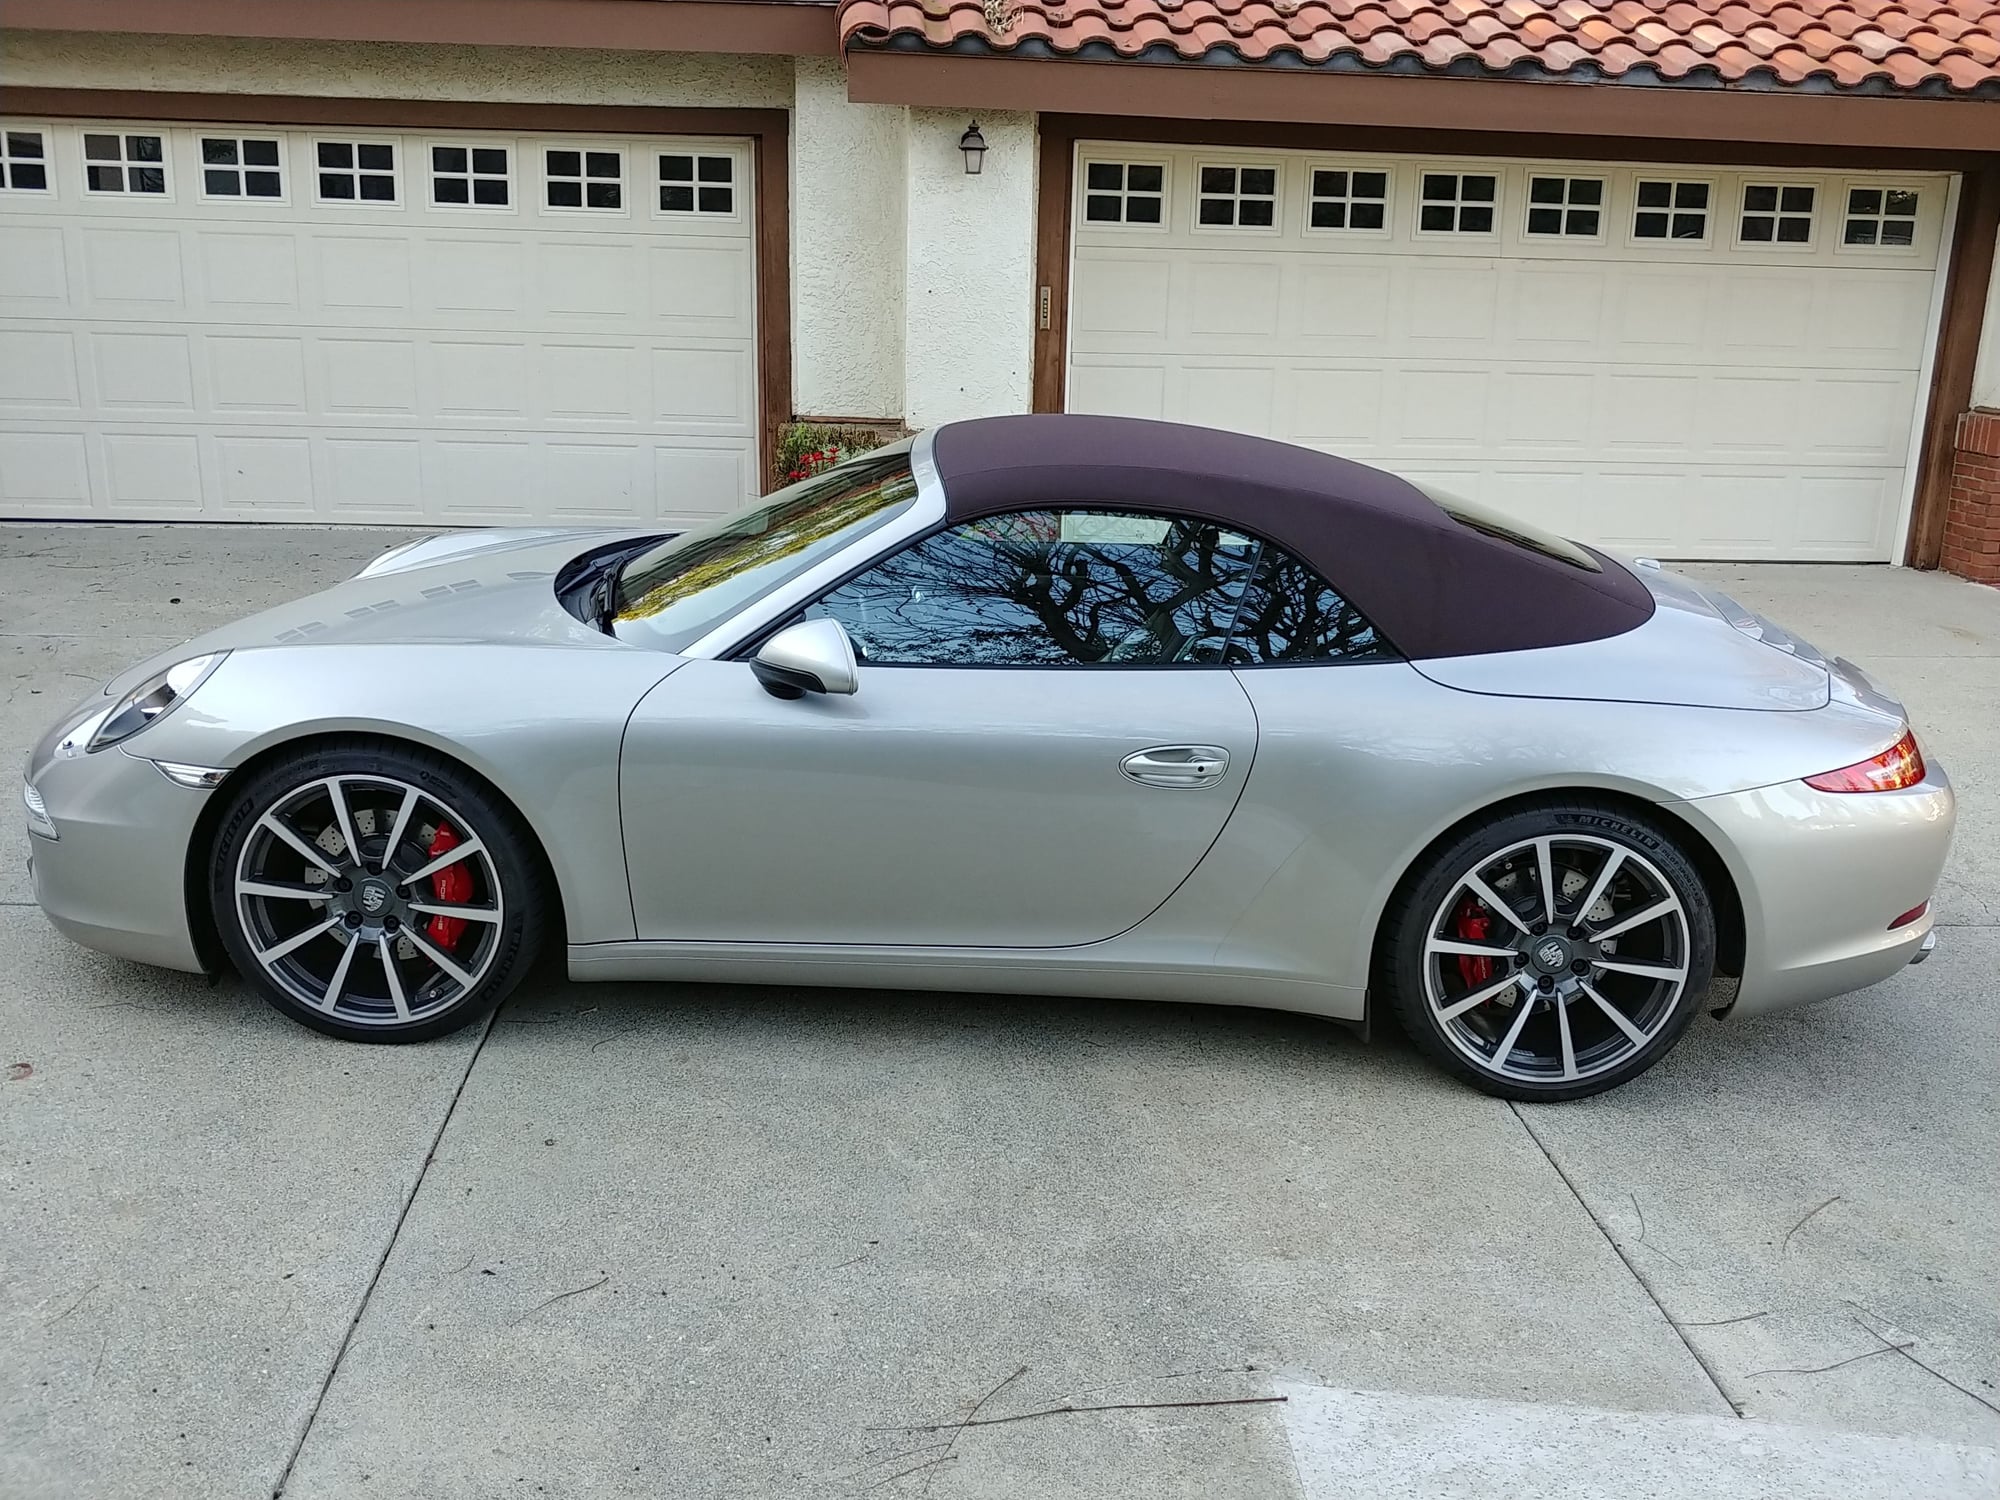 2012 Porsche 911 - 2012 Carrera S Cab Loaded - Used - VIN WP0CB2A90CS155091 - 23,000 Miles - 6 cyl - 2WD - Automatic - Convertible - Silver - Rowland Heights, CA 91748, United States